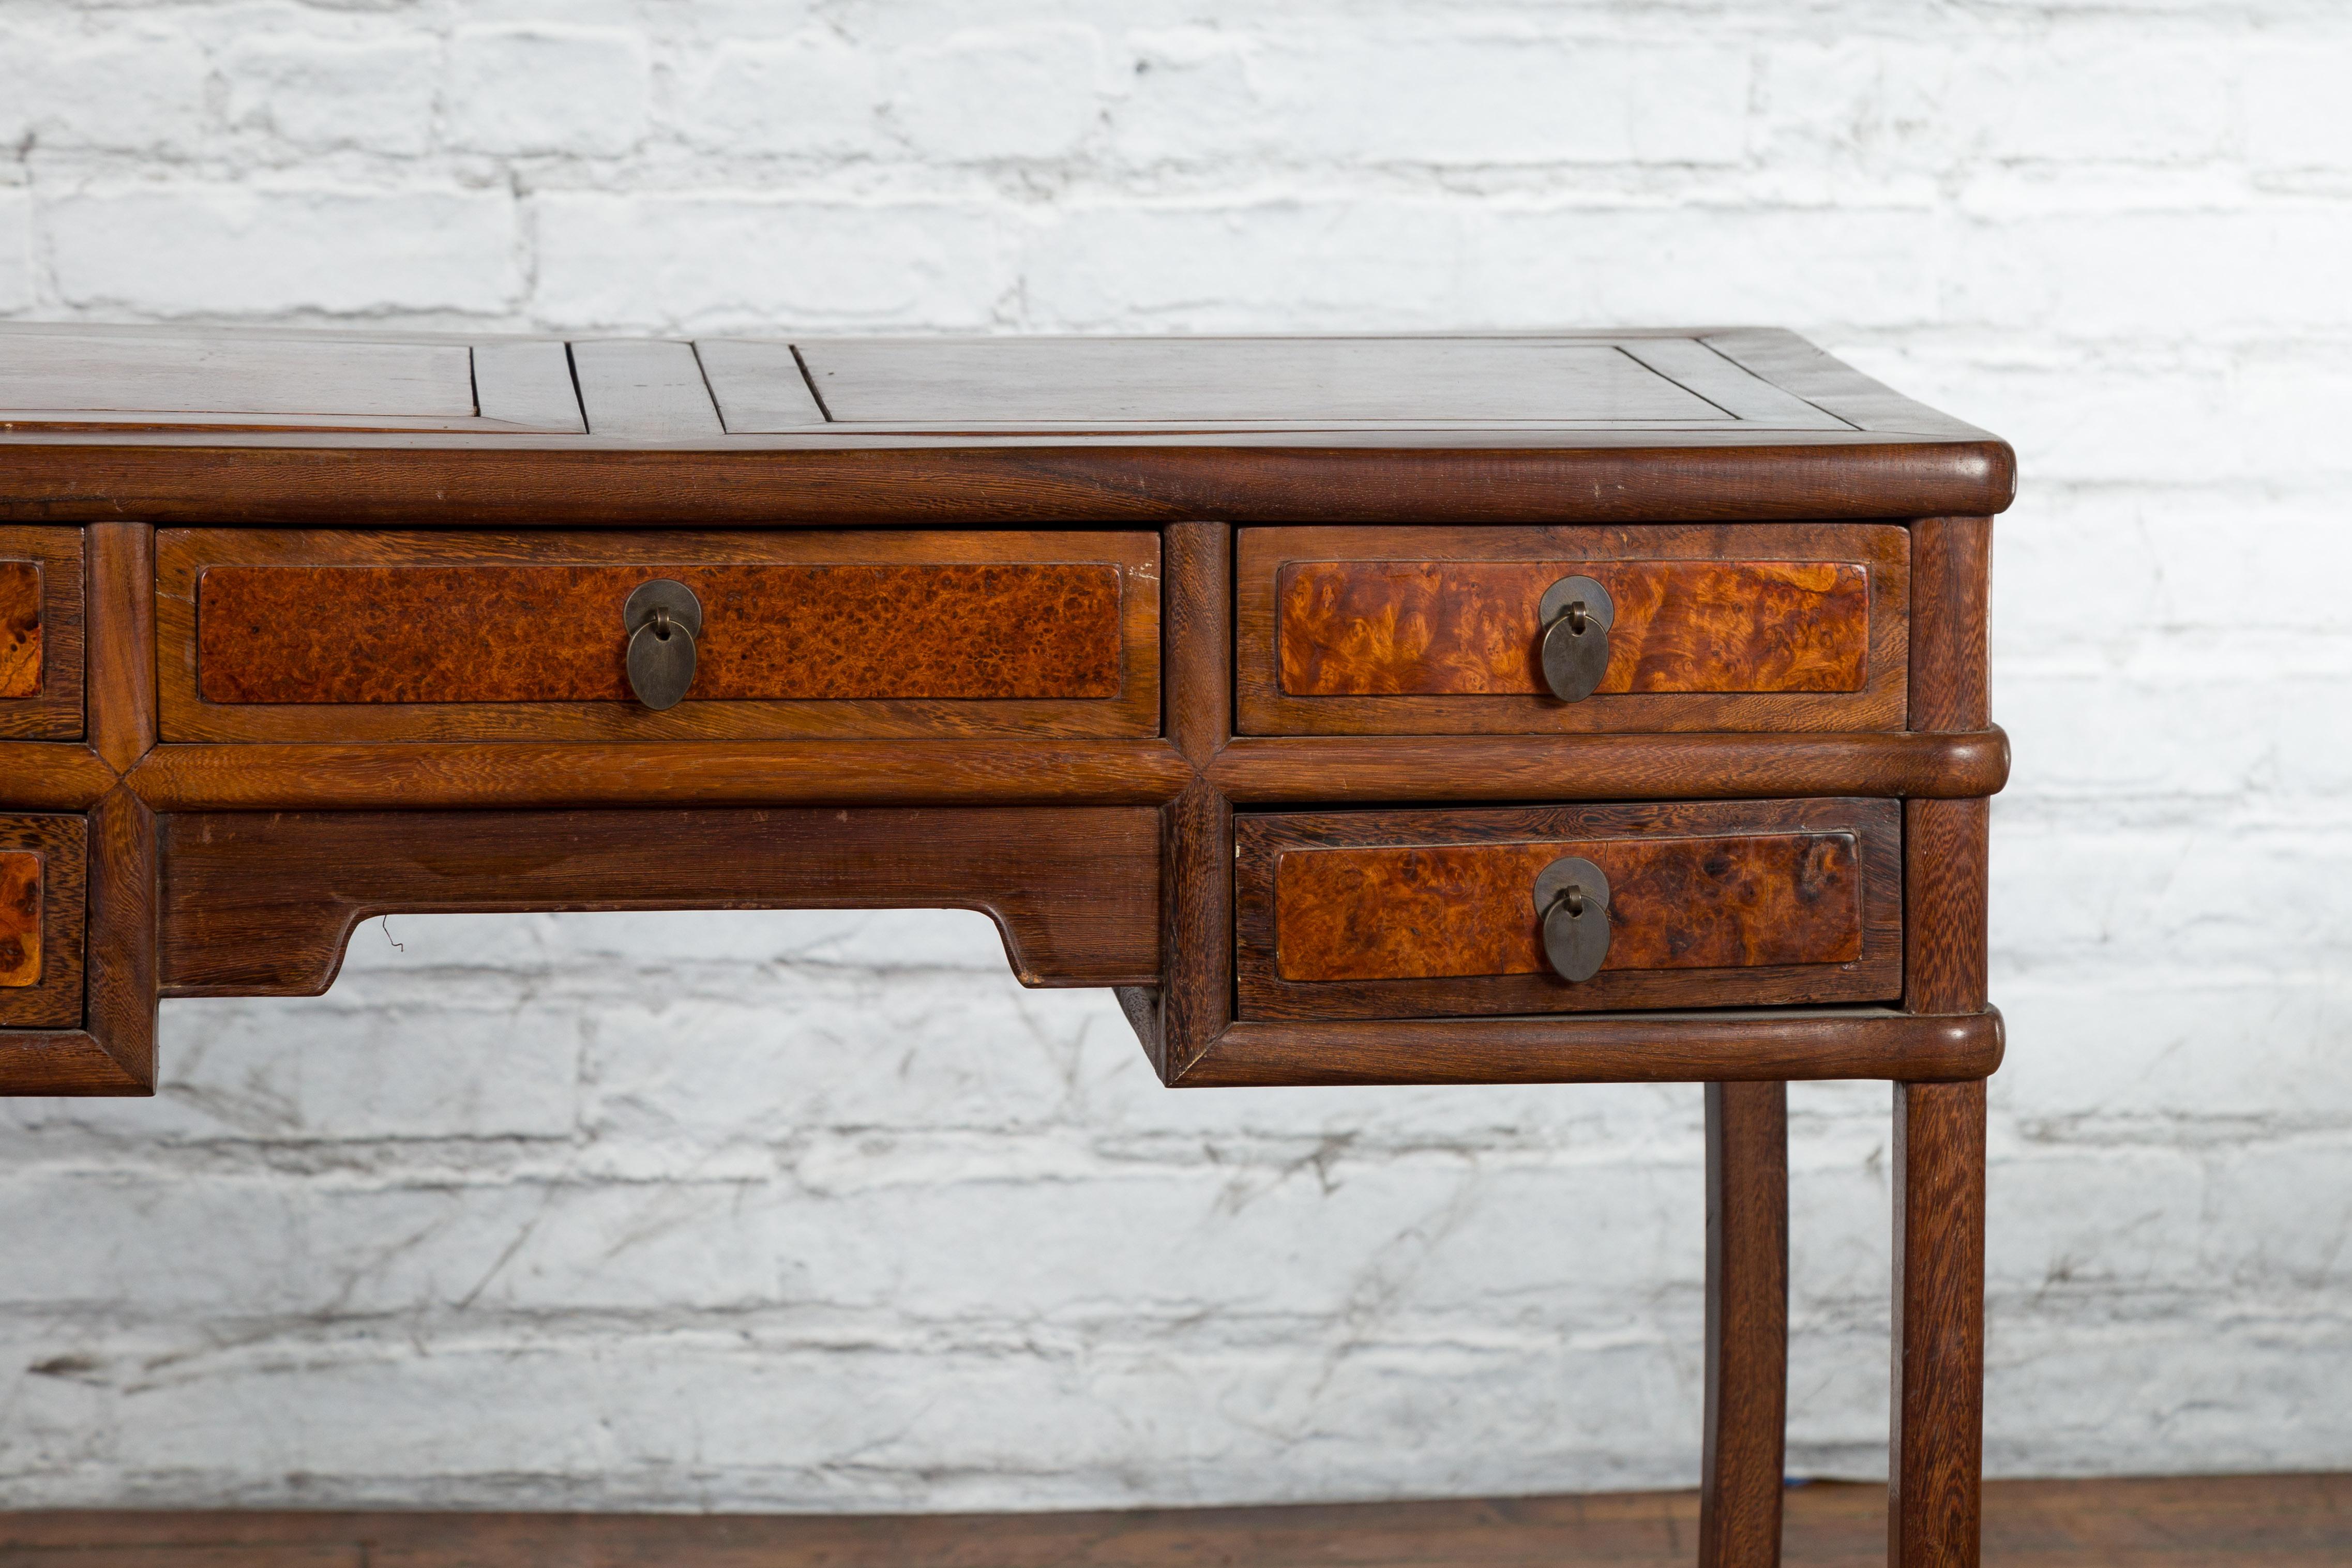 Qing Dynasty 19th Century Desk with Burlwood Top, Drawers and Cracked Ice Shelf In Good Condition For Sale In Yonkers, NY